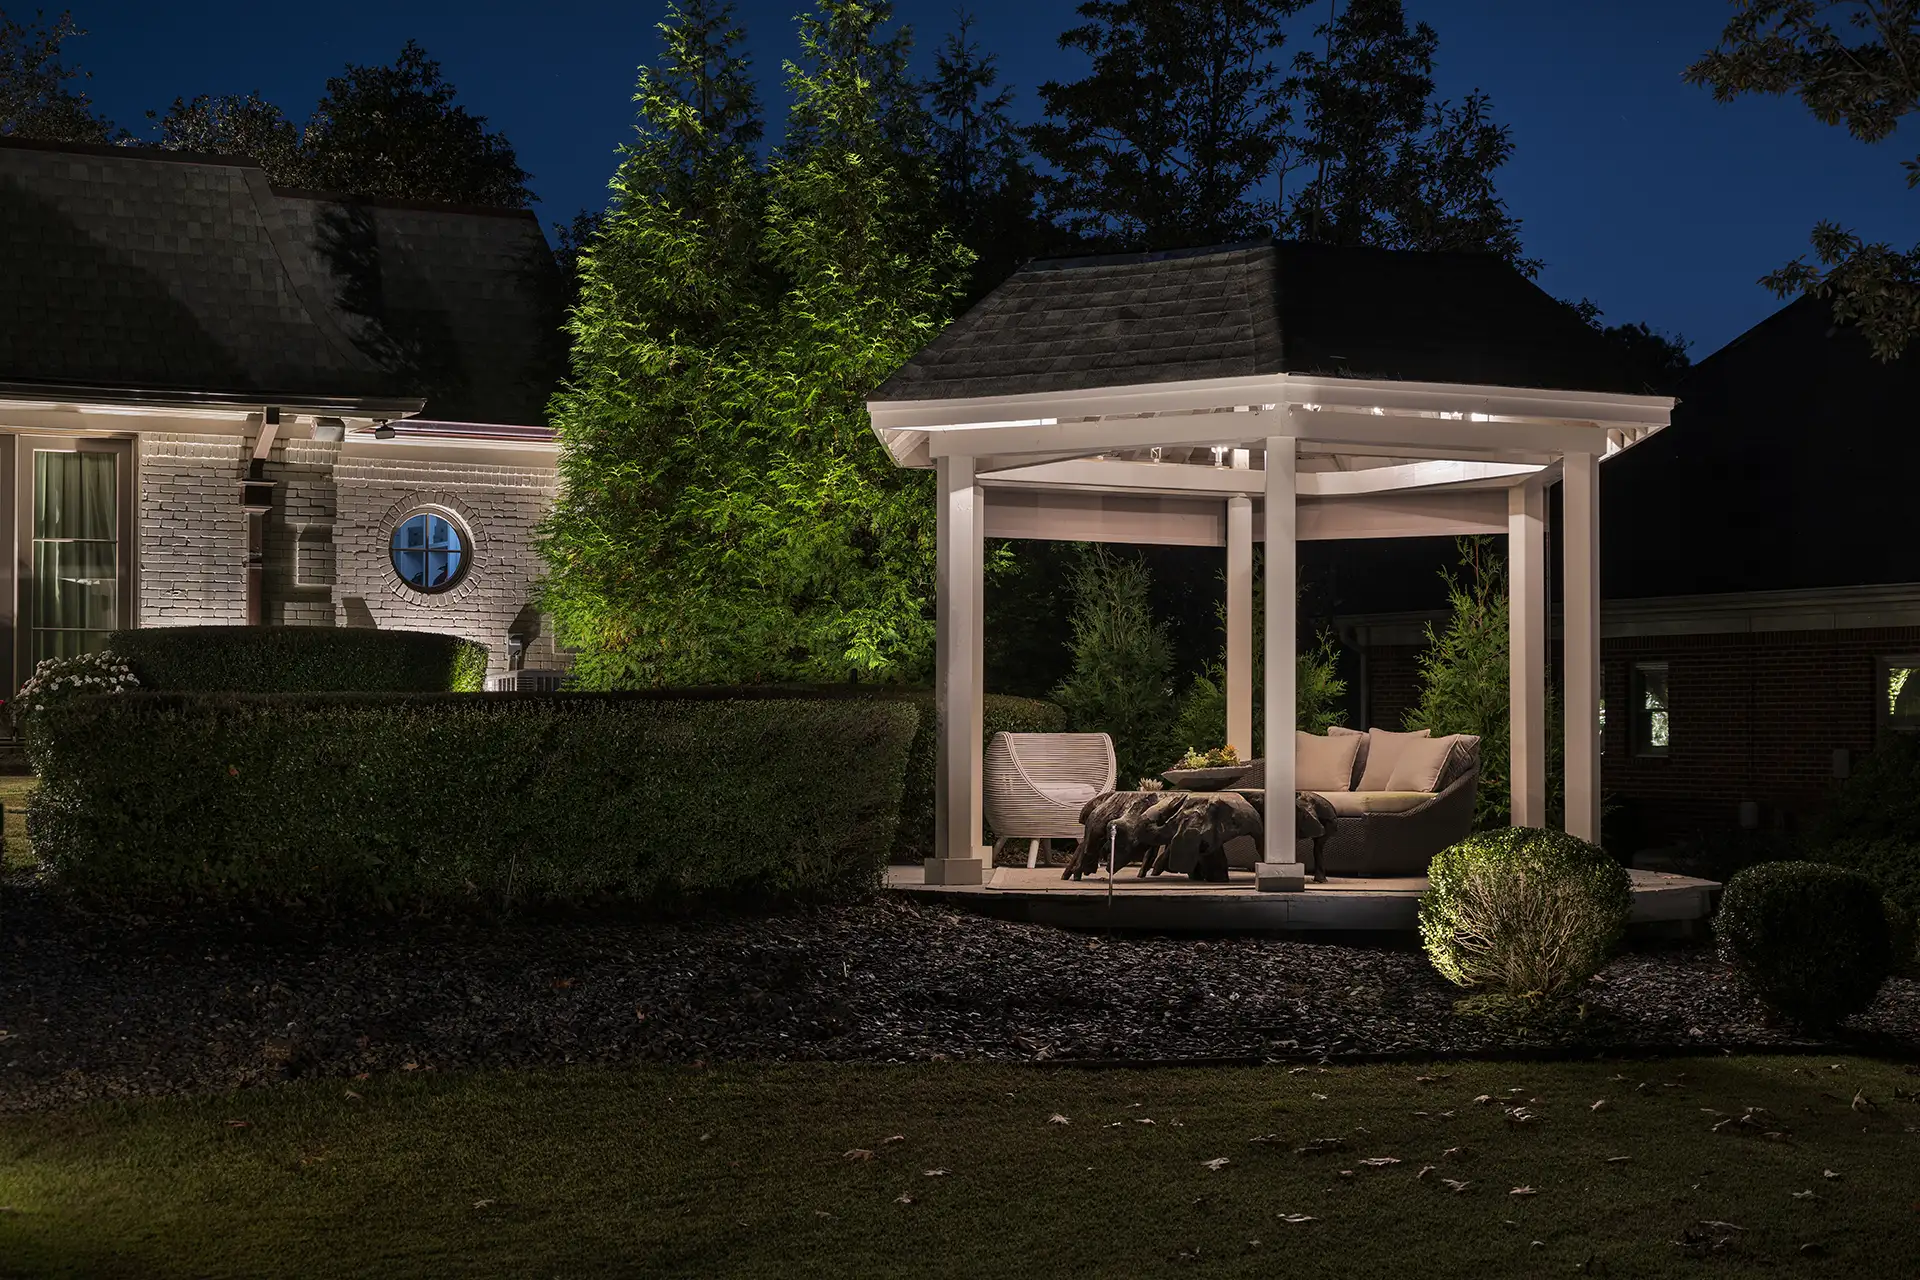 Winged Foot image 2 pergola seating Lighthouse Outdoor Lighting and Audio Jackson MS